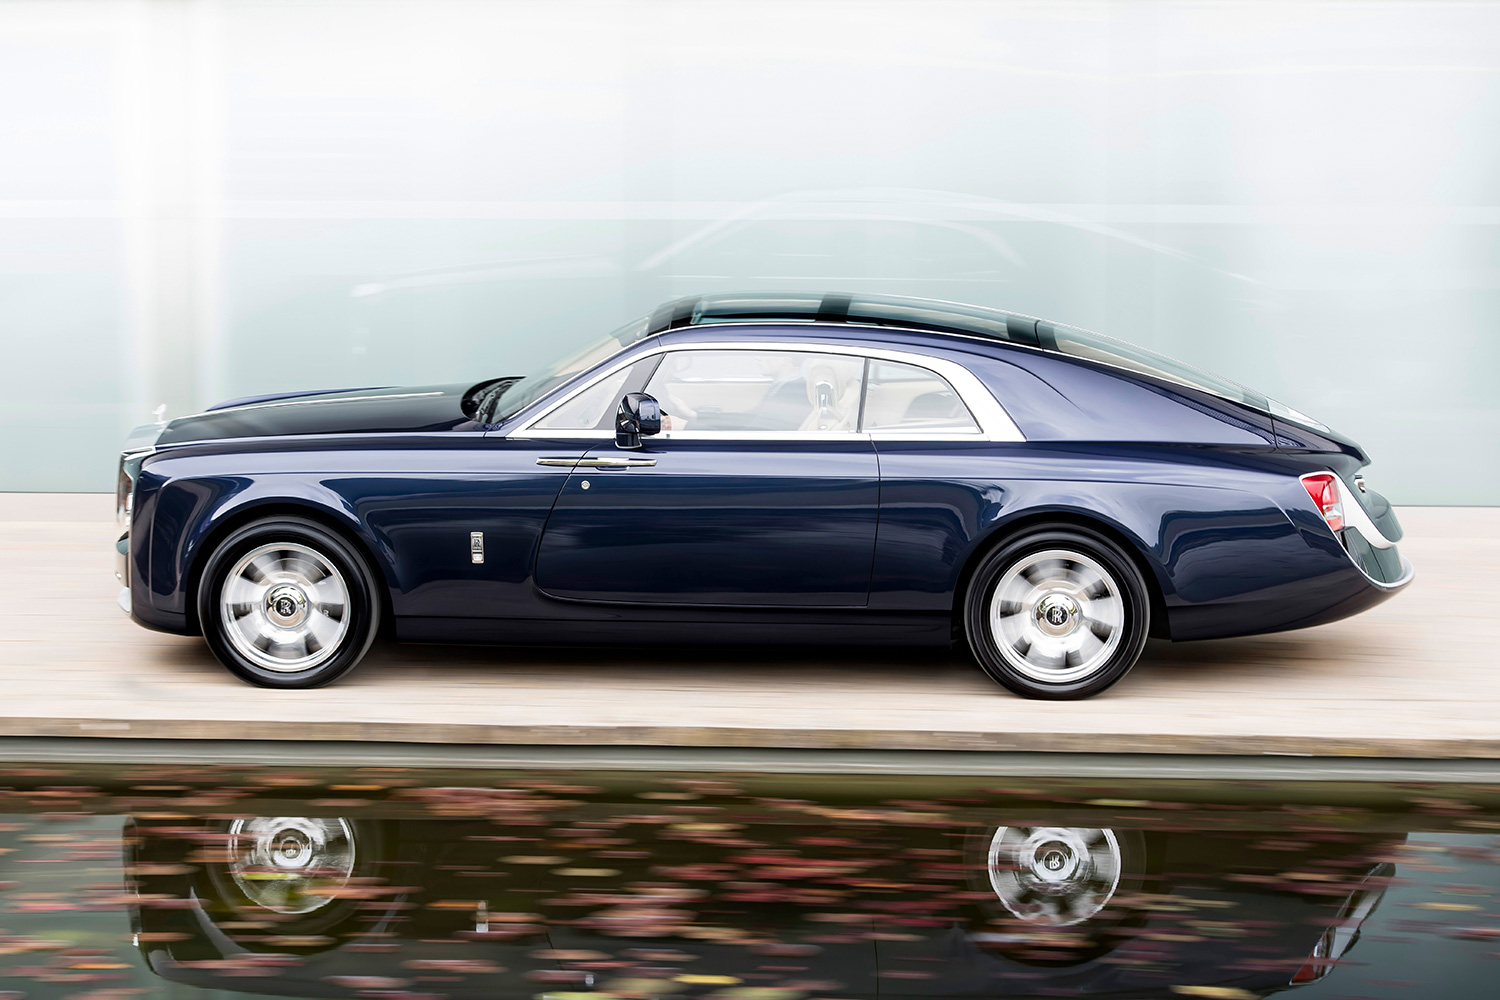 The Rolls Royce Boat Tail: is this Britain's most eccentric car